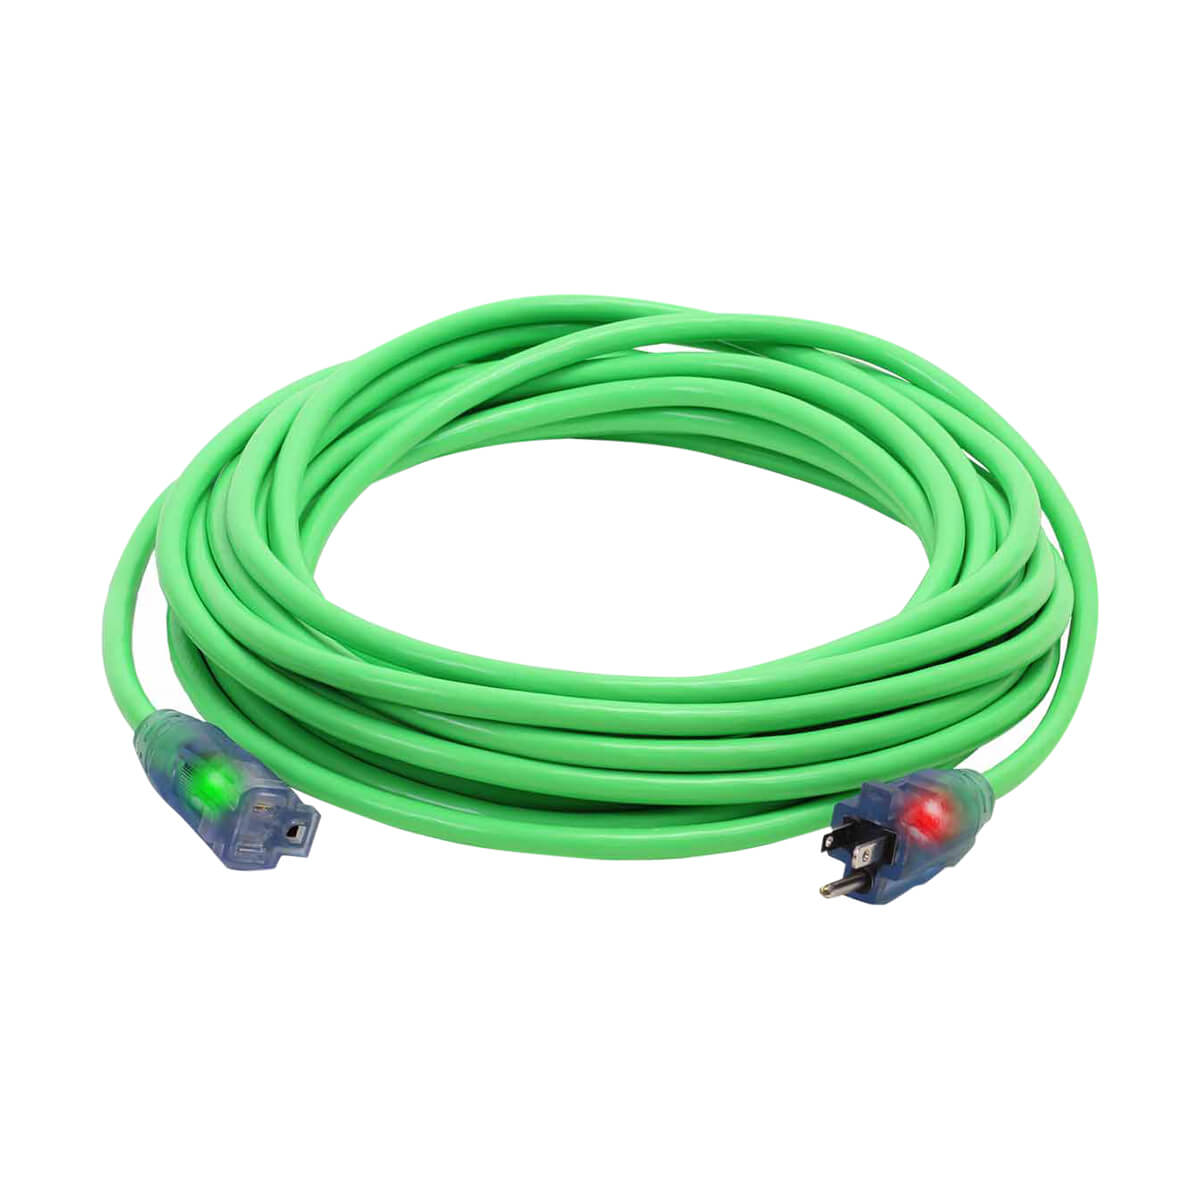 35-ft Pro Glo Extension Cords 14/3 - CGM - Green